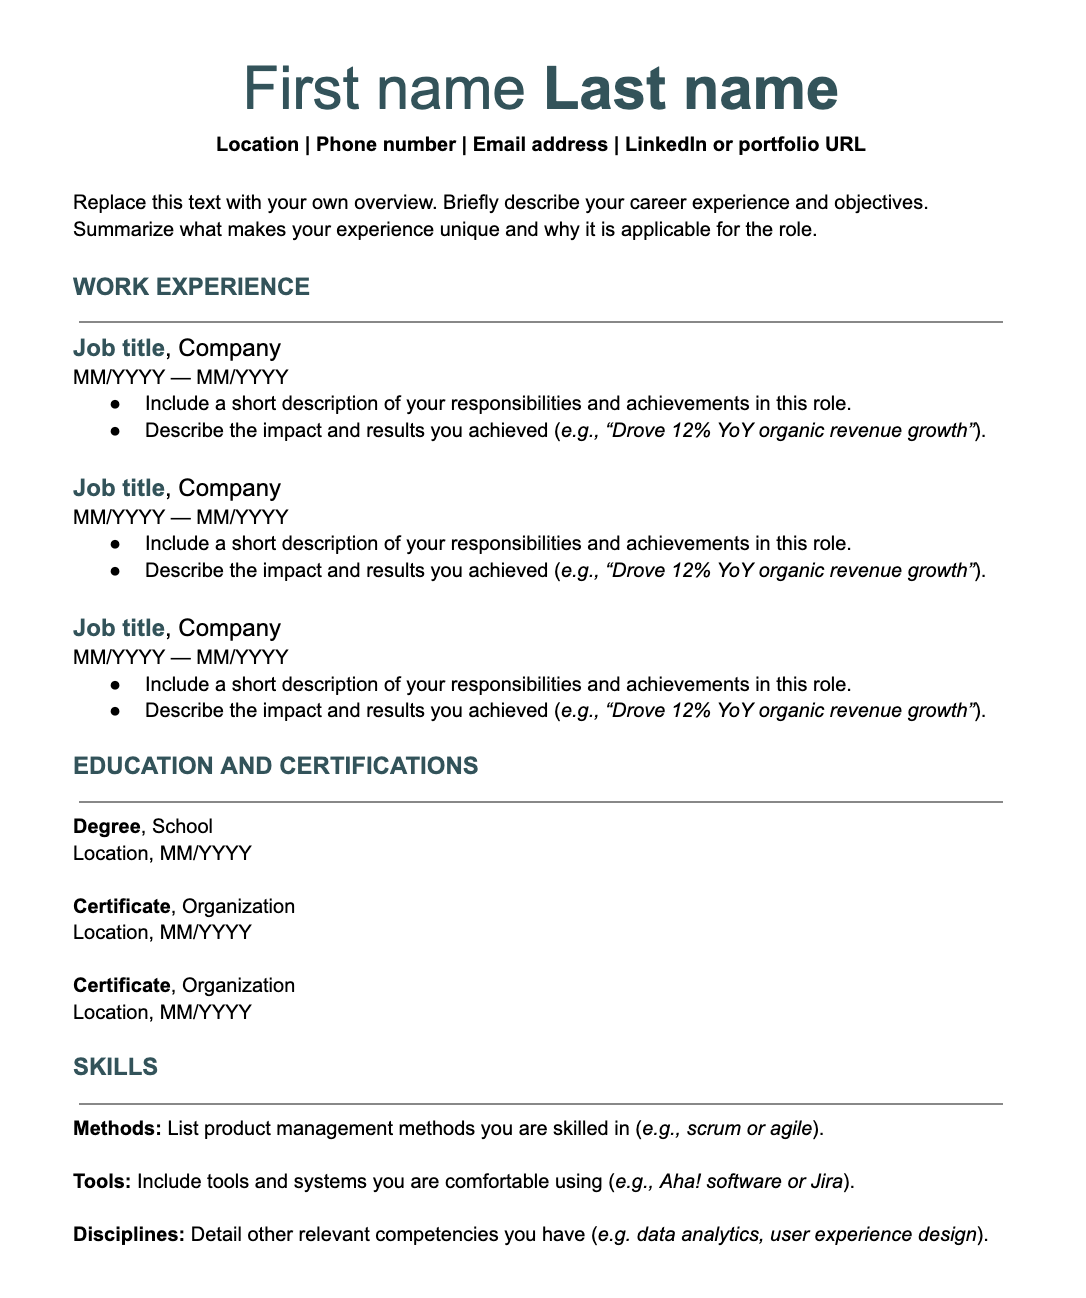 Standard product manager resume